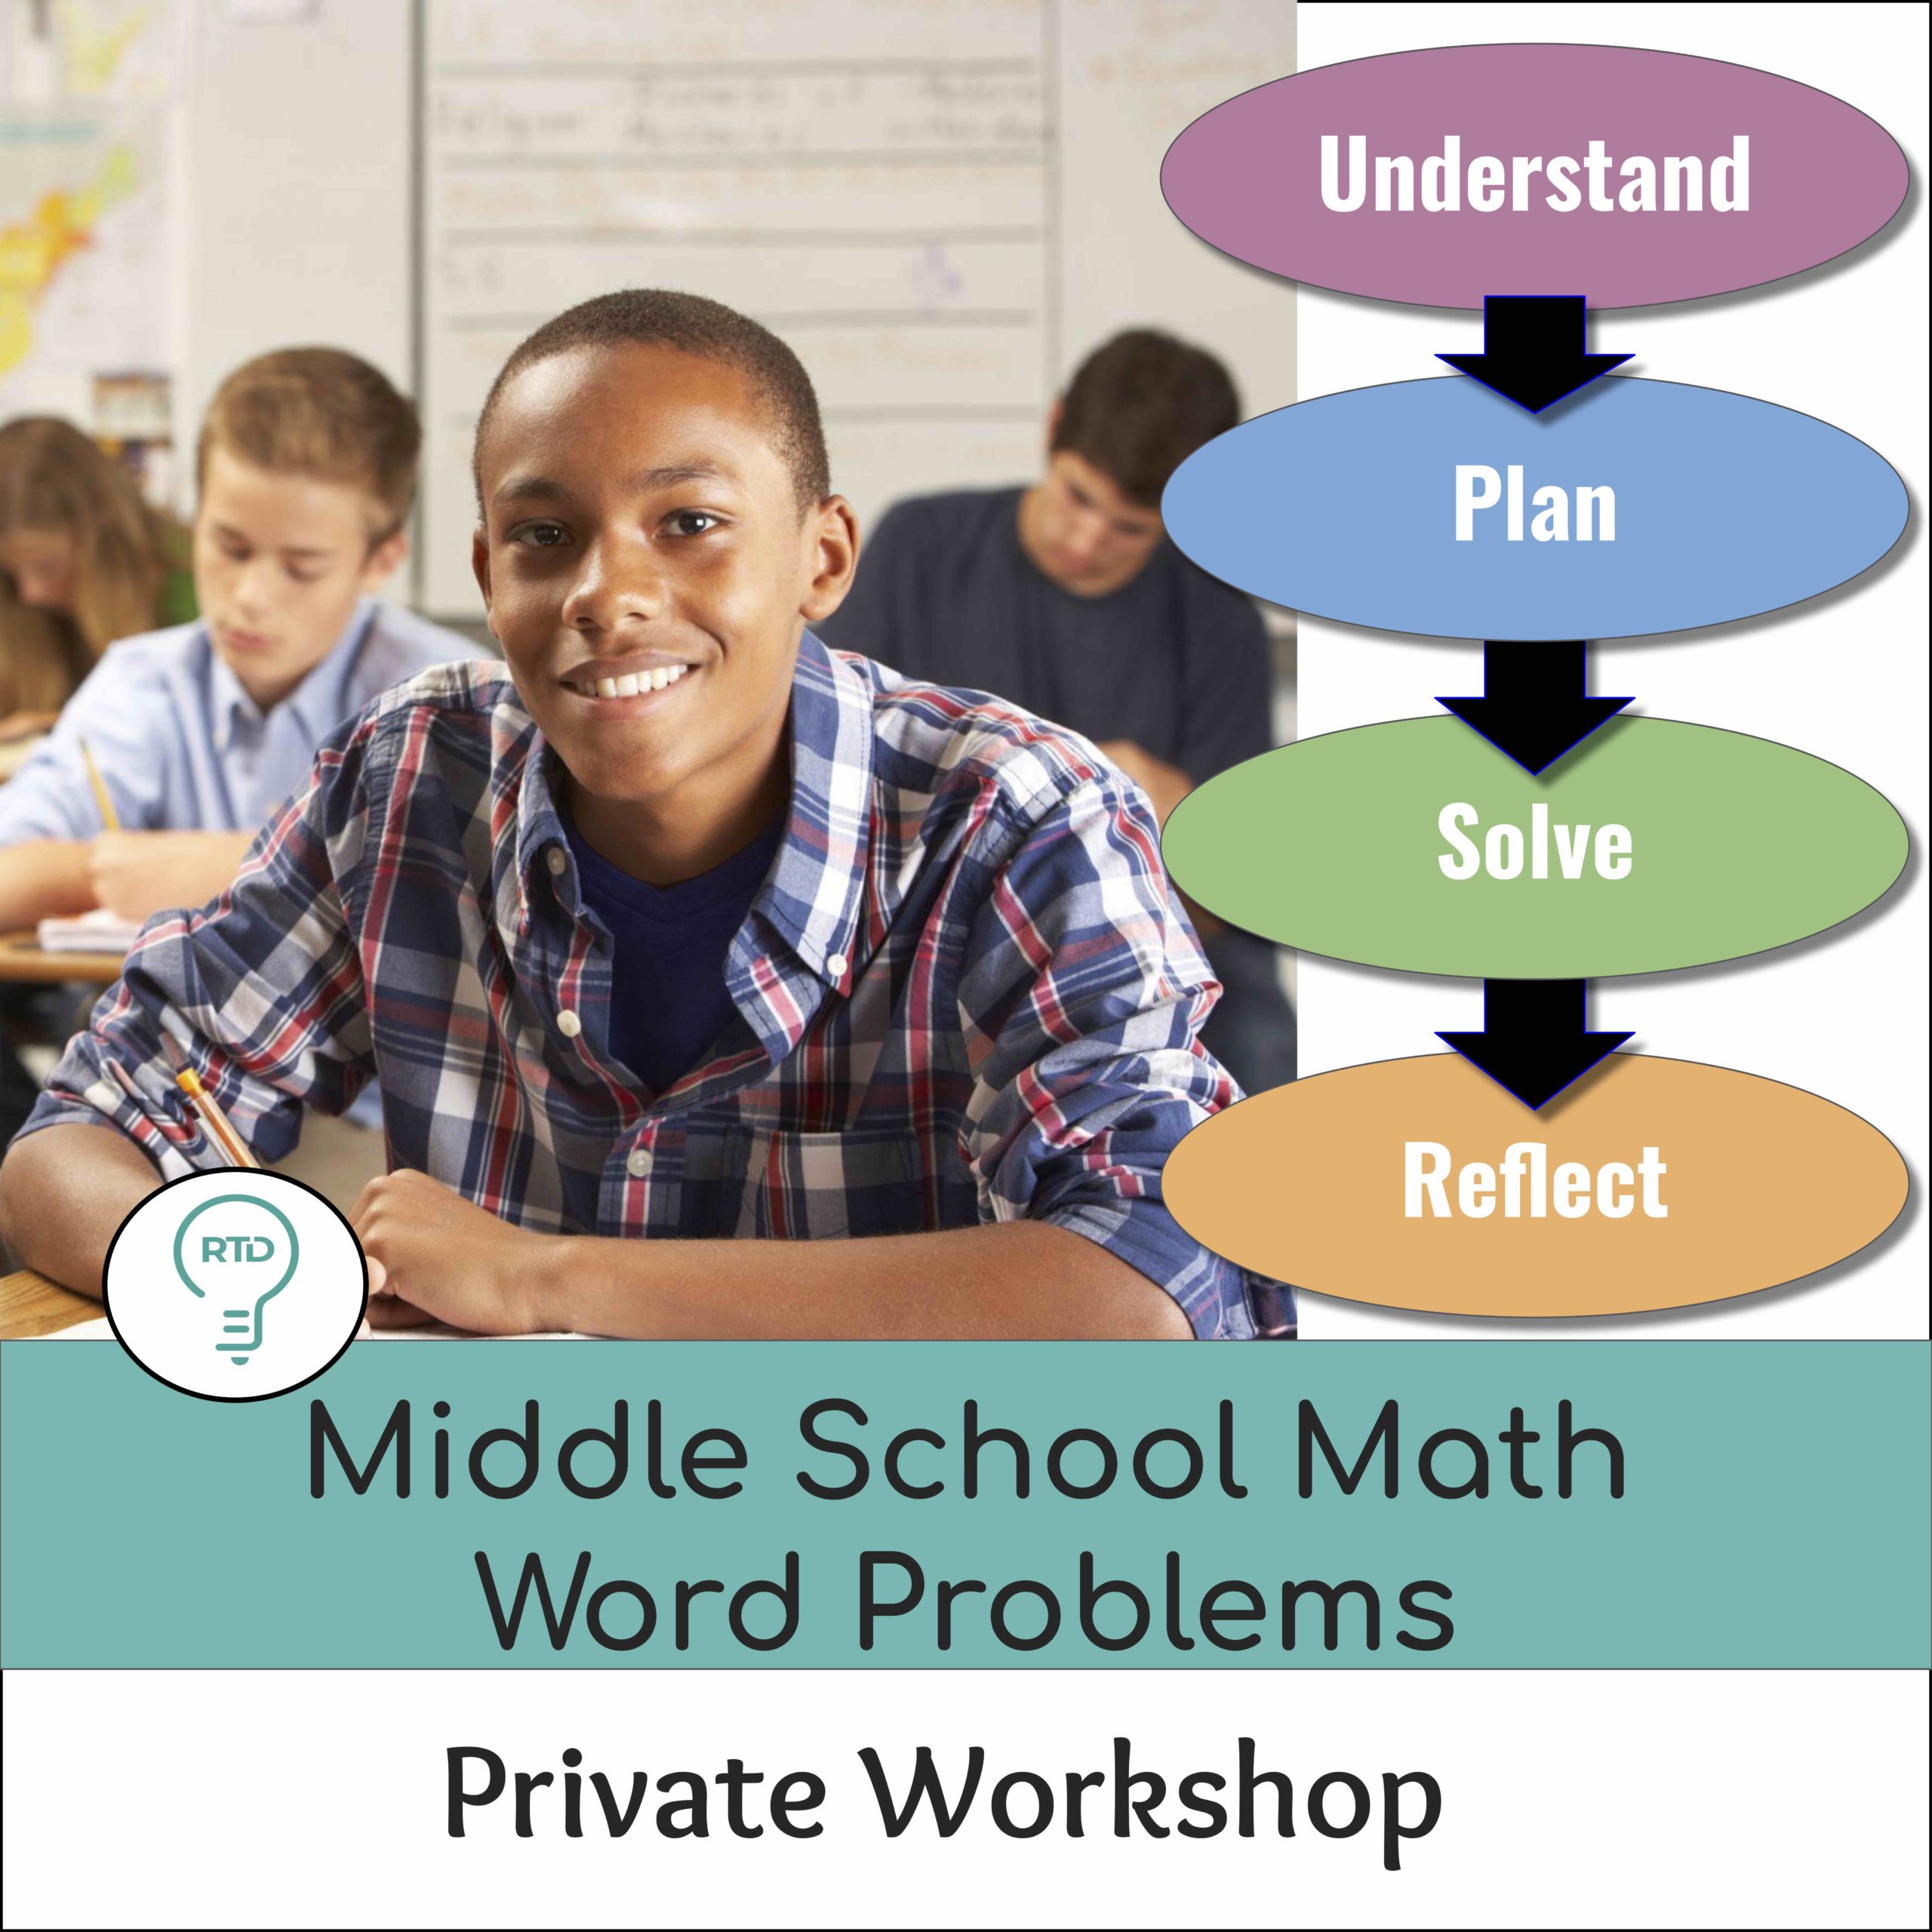 Private Workshop: How to Teach Word Problems in Middle School